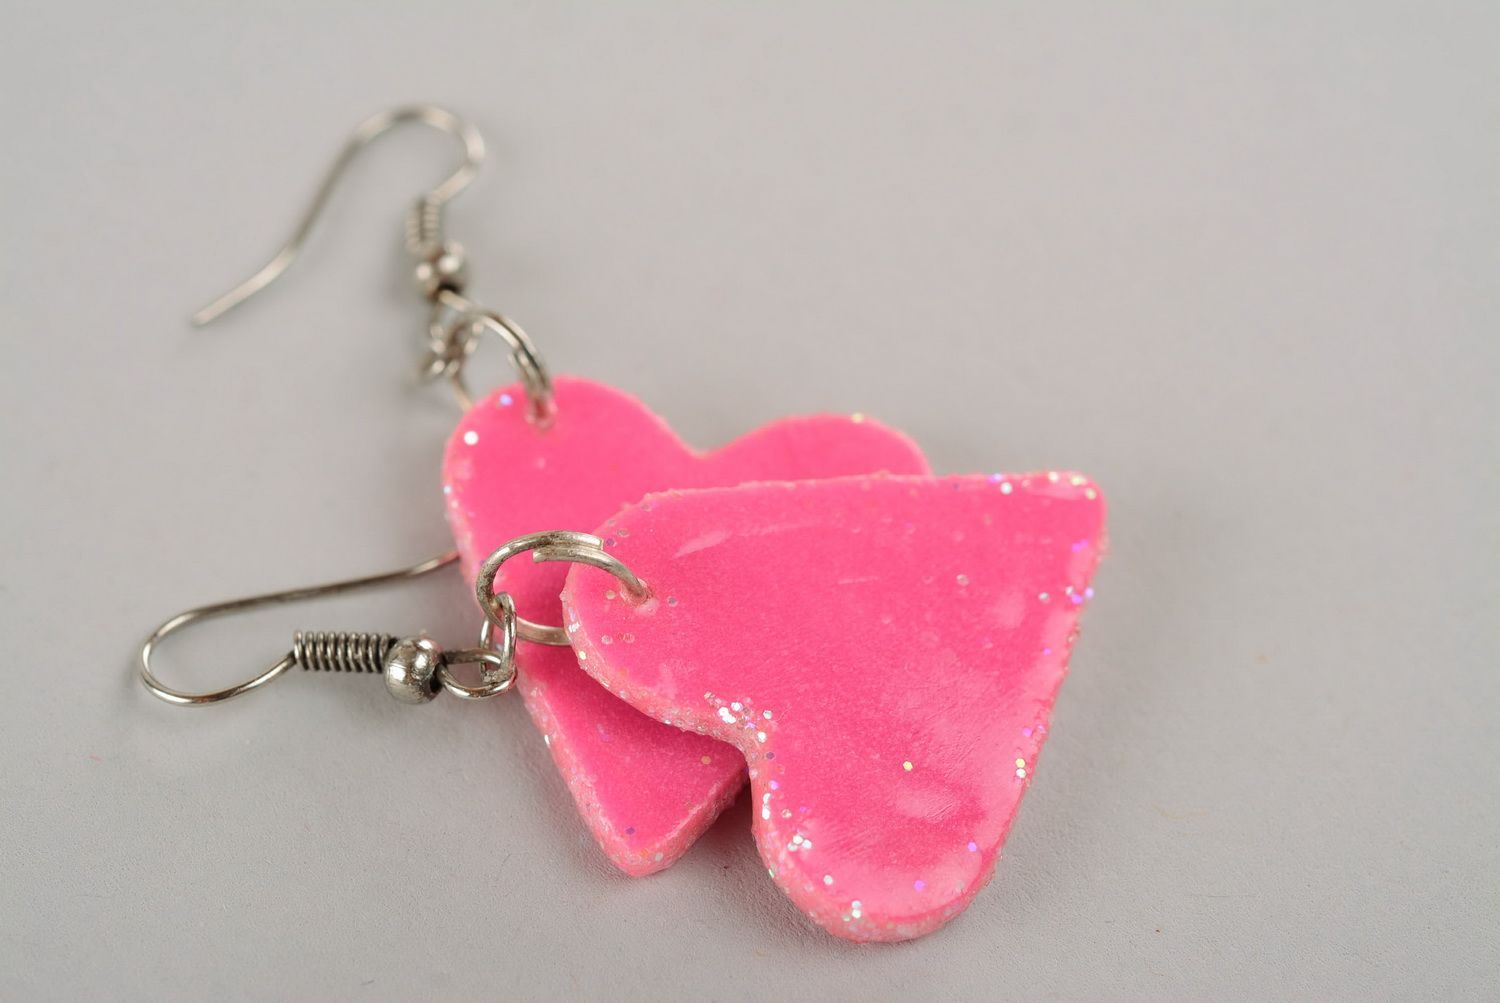 Heart earrings made of polymer clay photo 2